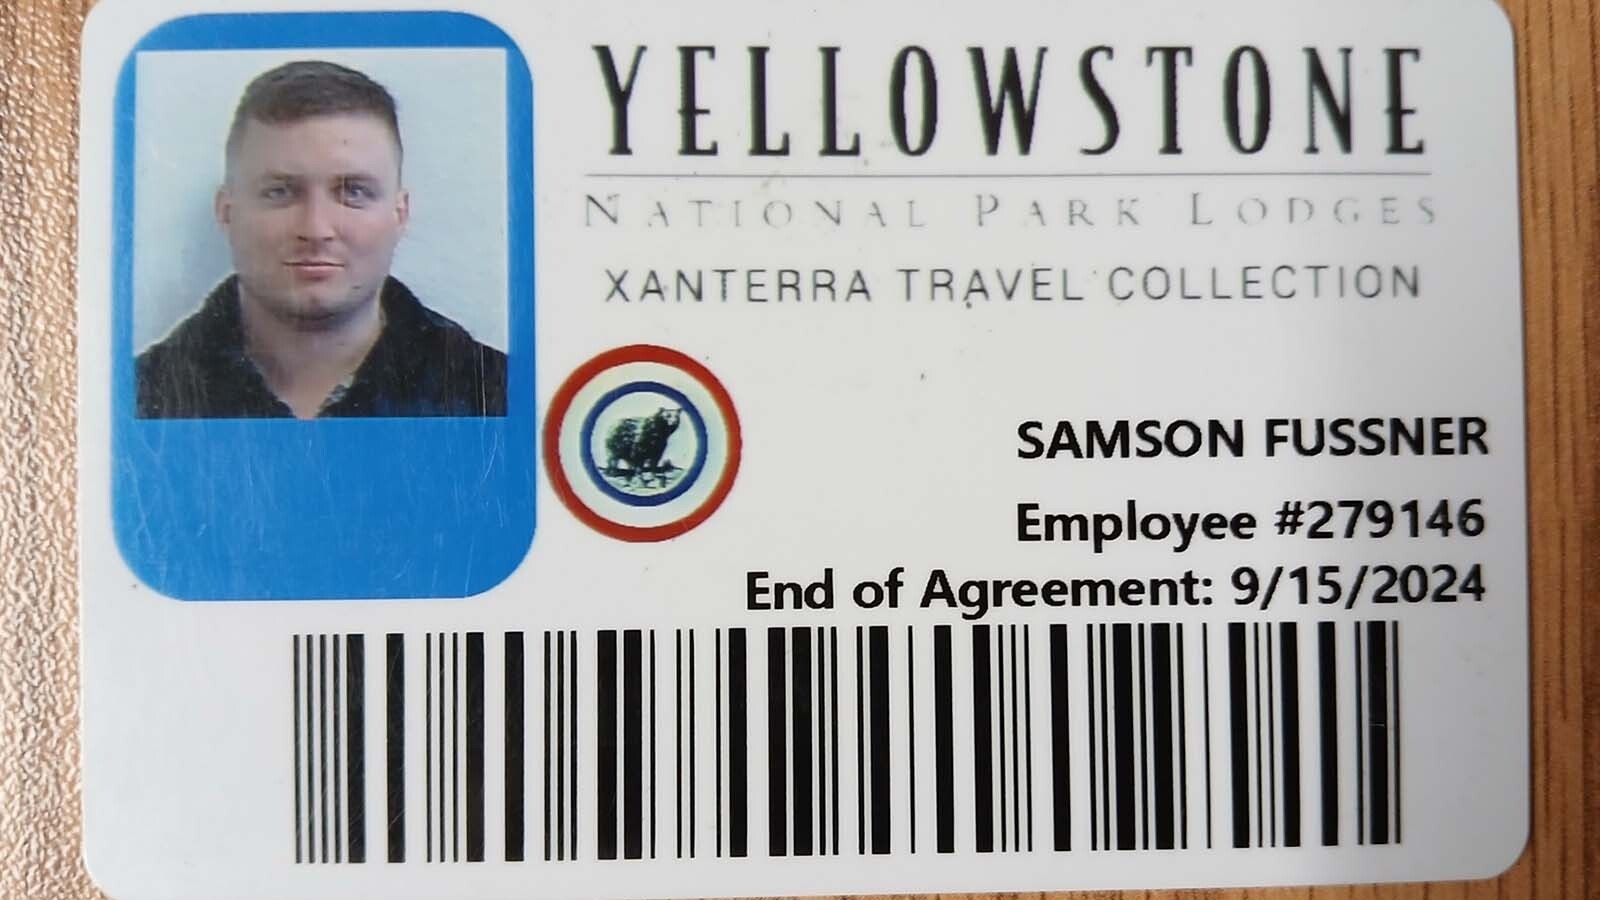 Samson Lucas Bariah Fussner, 28, of Florida has been identified as the man killed in a shootout with Yellowstone National Park rangers on the Fourth of July. He was a worker for park contractor Xanterra Travel Collection.